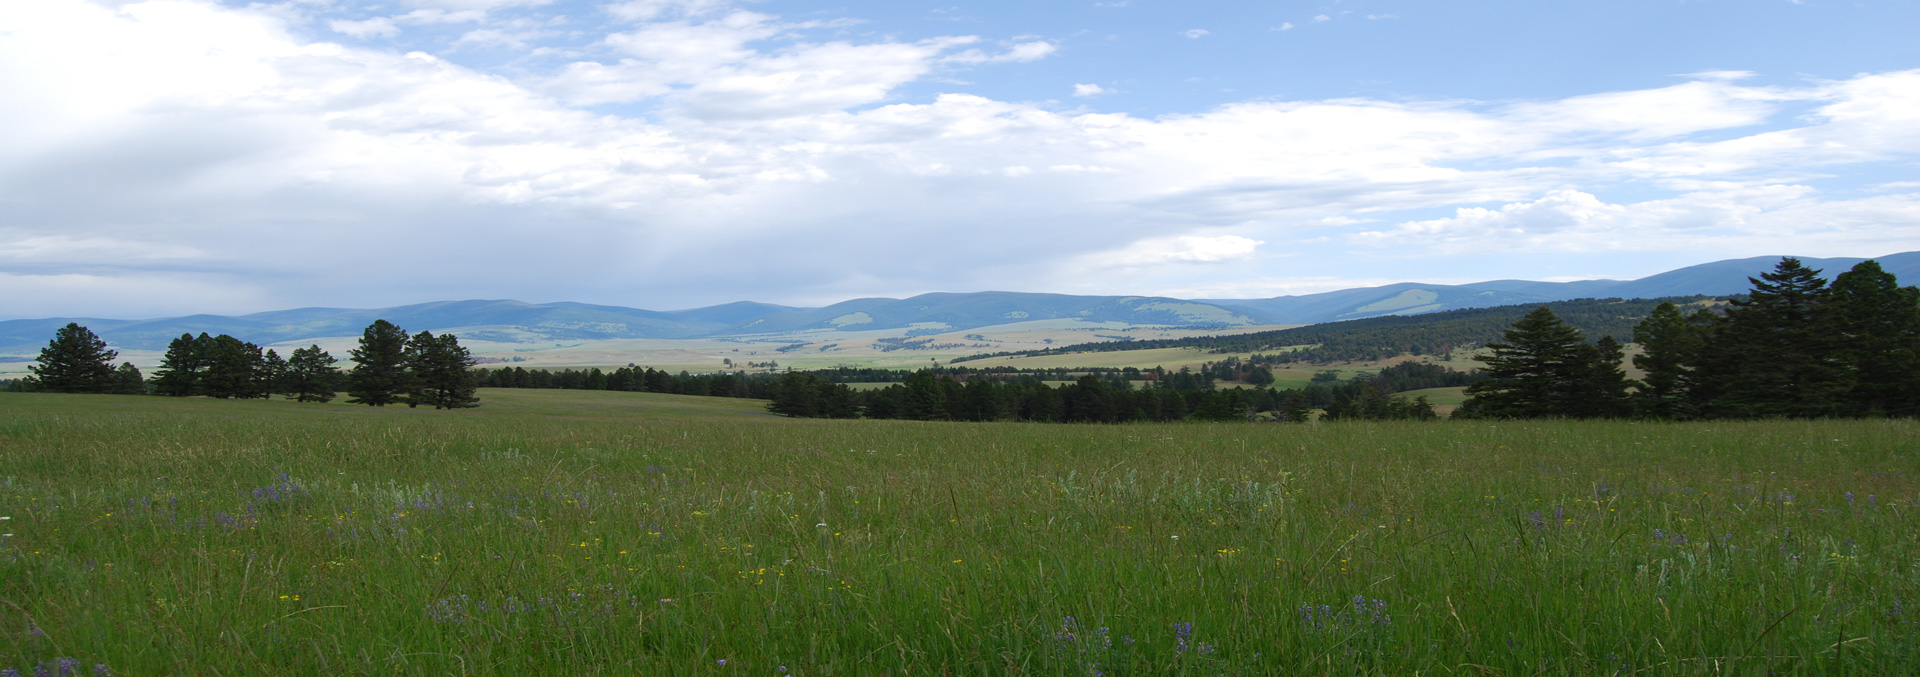 montana cattle ranch for sale montana little valley ranch